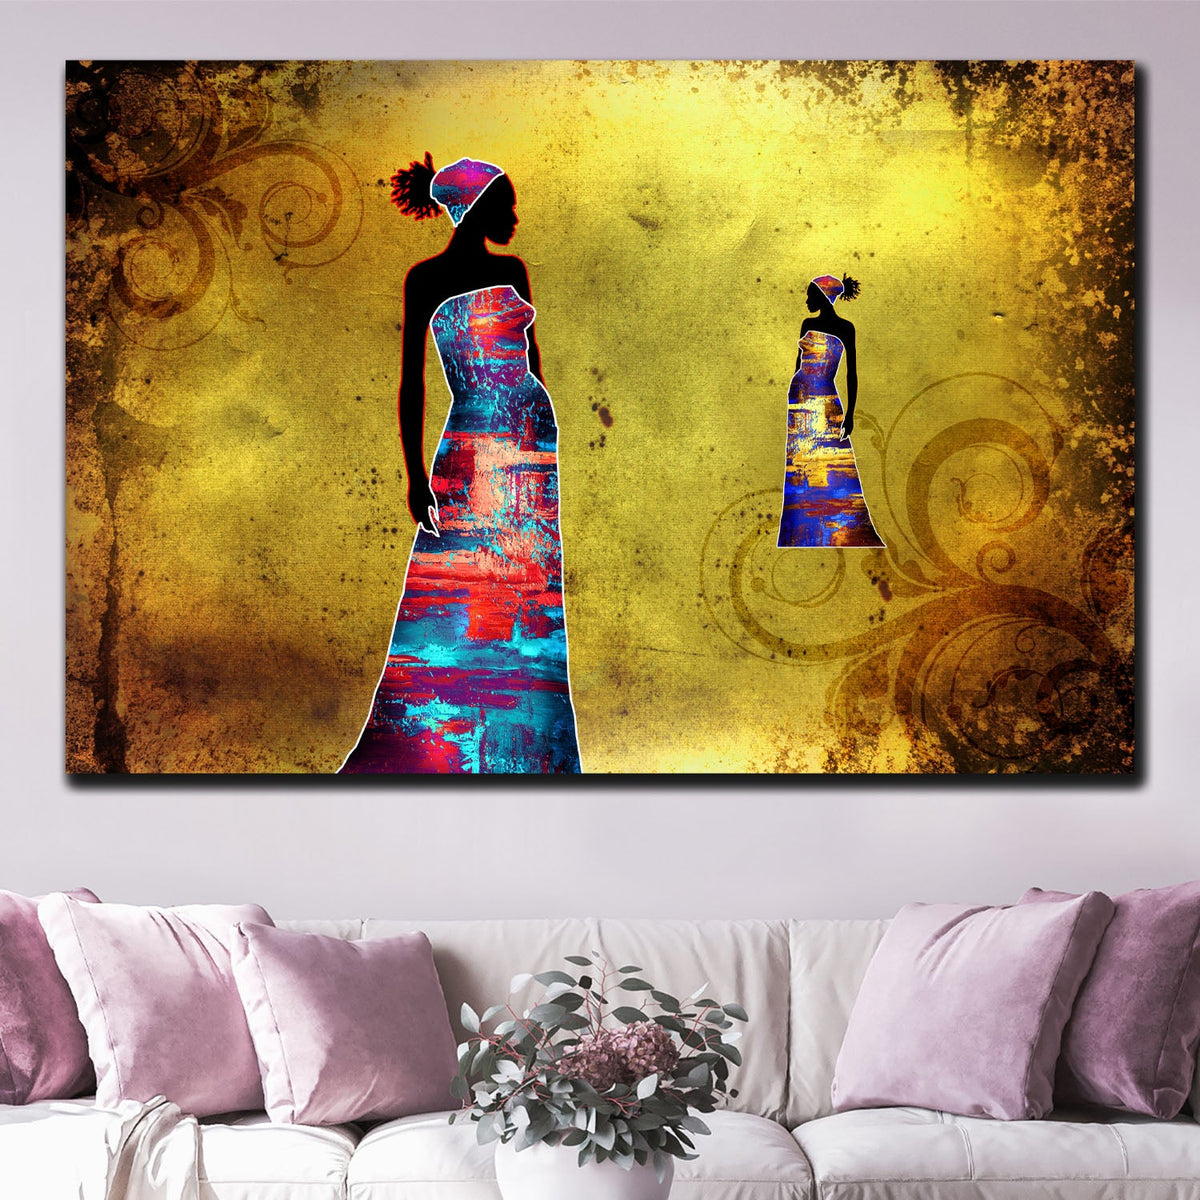 https://cdn.shopify.com/s/files/1/0387/9986/8044/products/AfricanEthnicWomanCanvasArtprintStretched-3.jpg